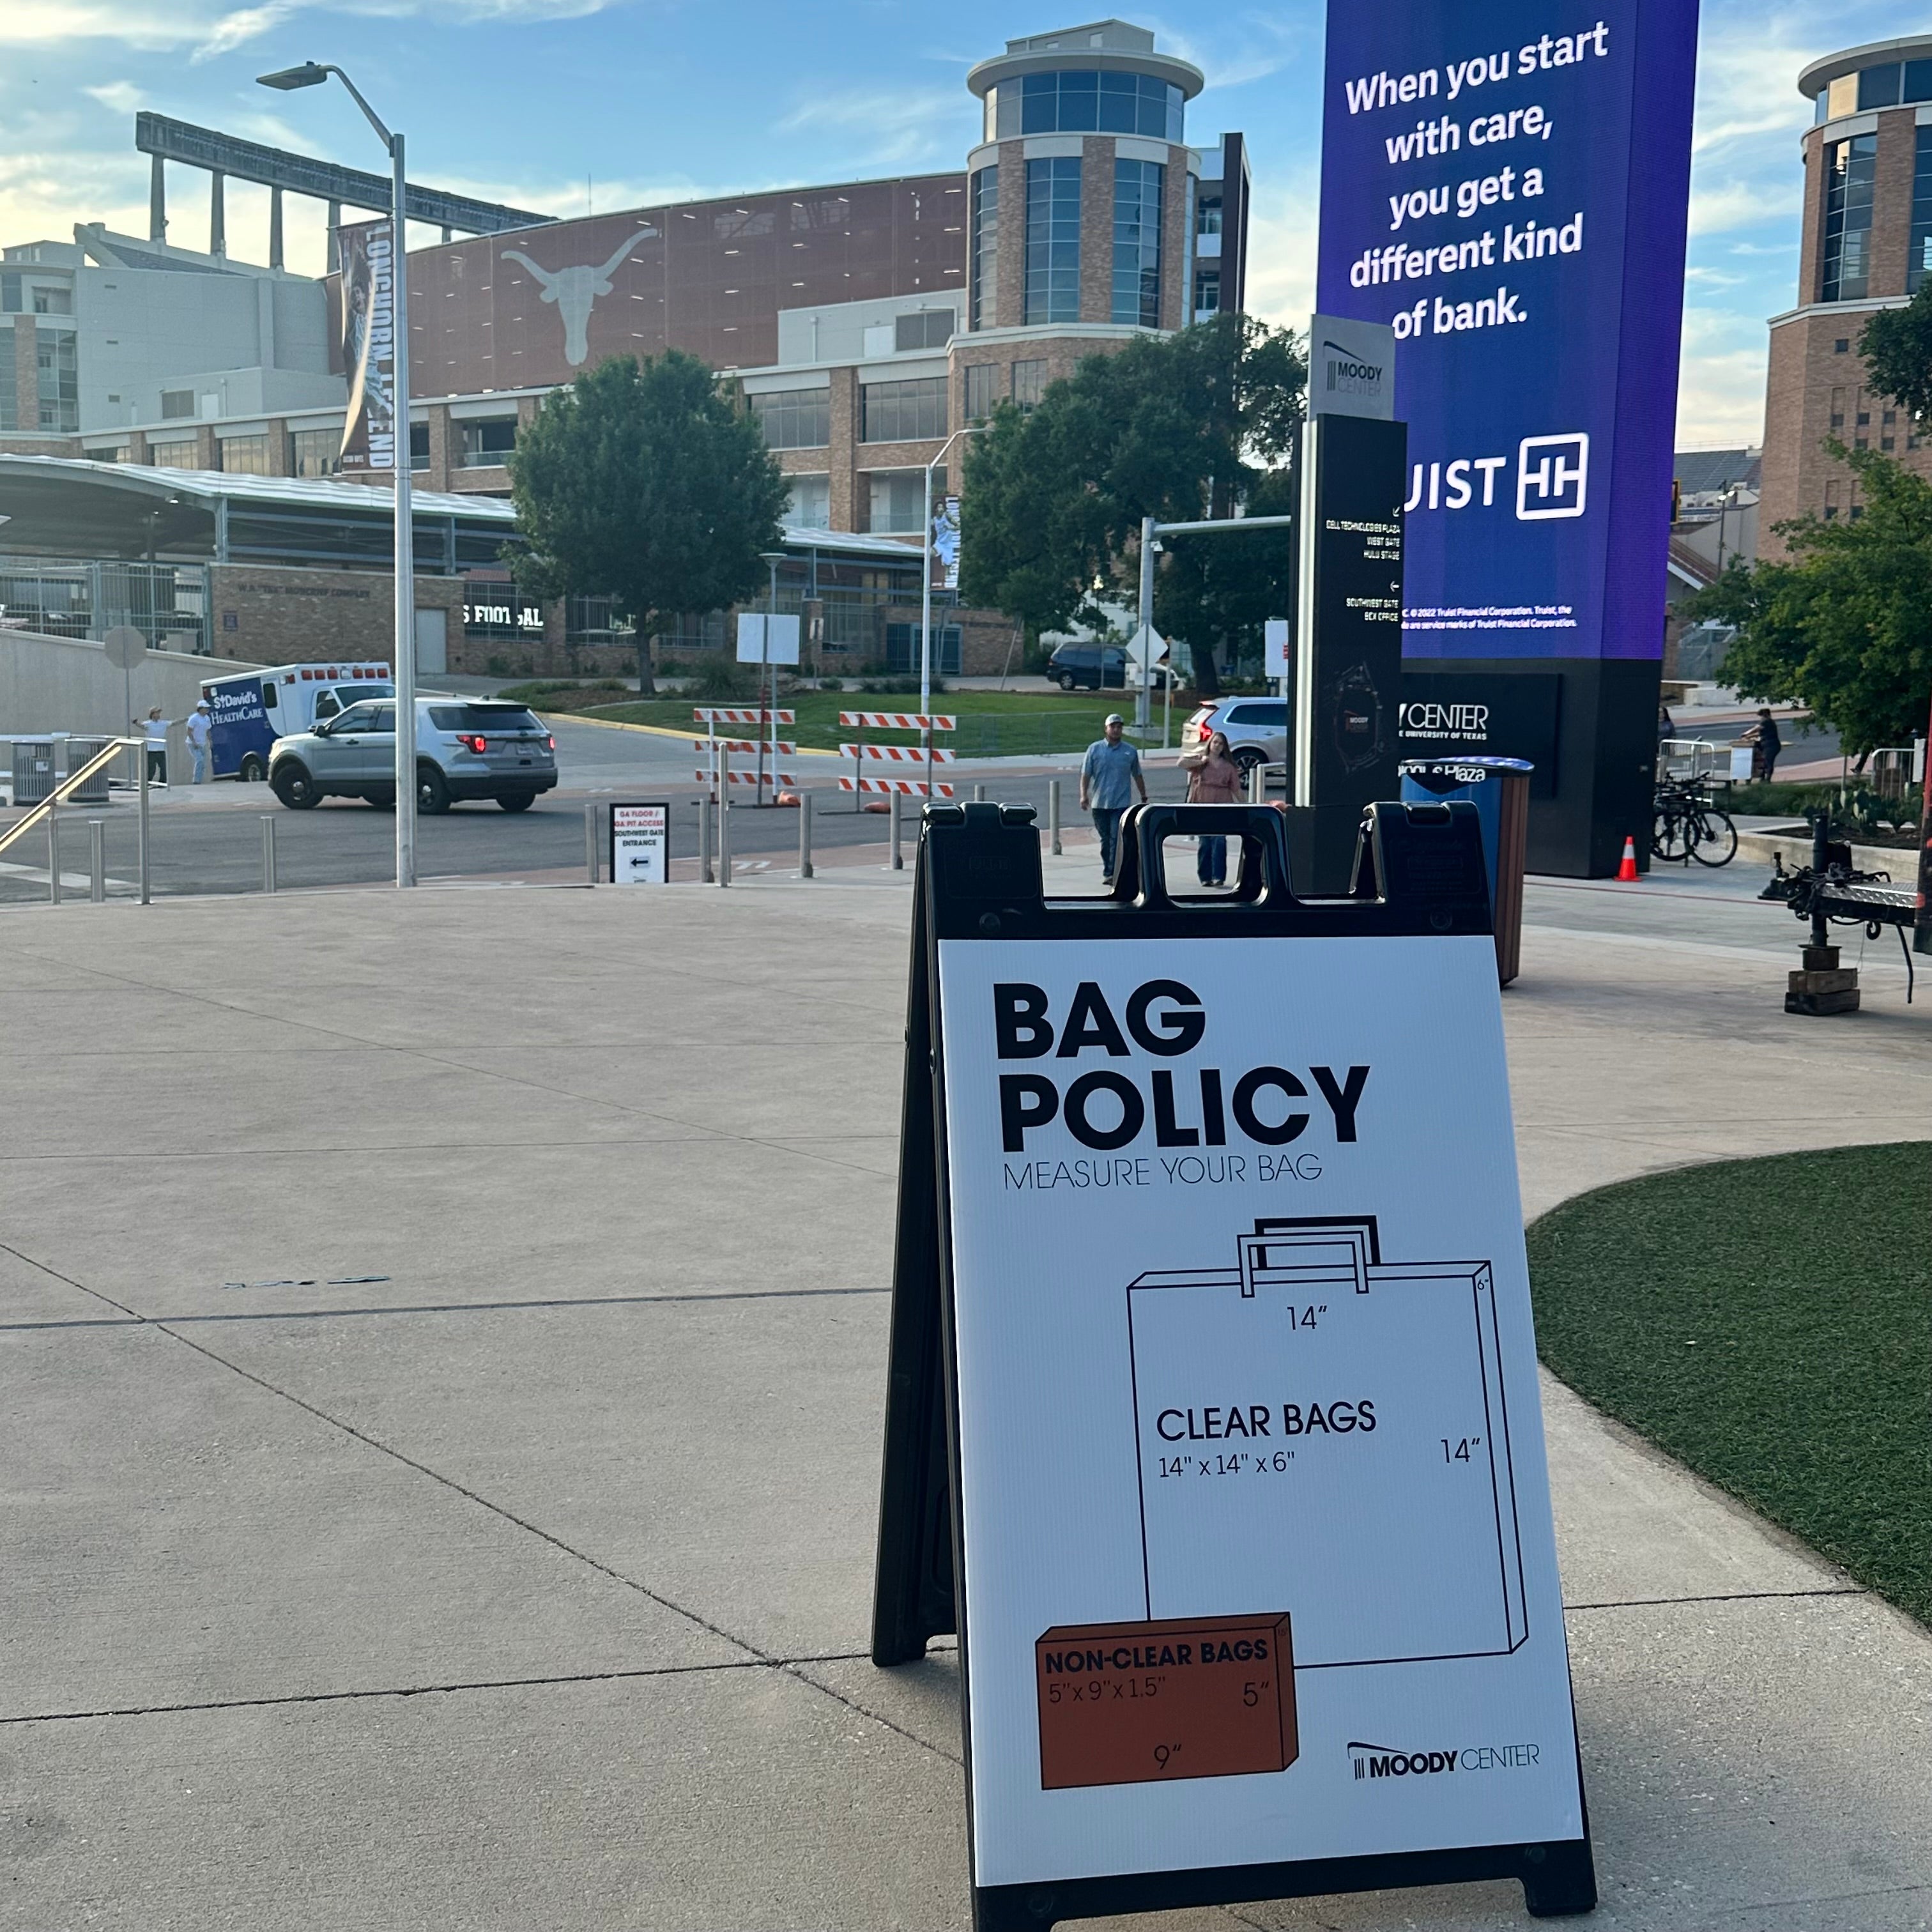 Clear Bag Policy at the University of Texas football stadium and the Moody Center